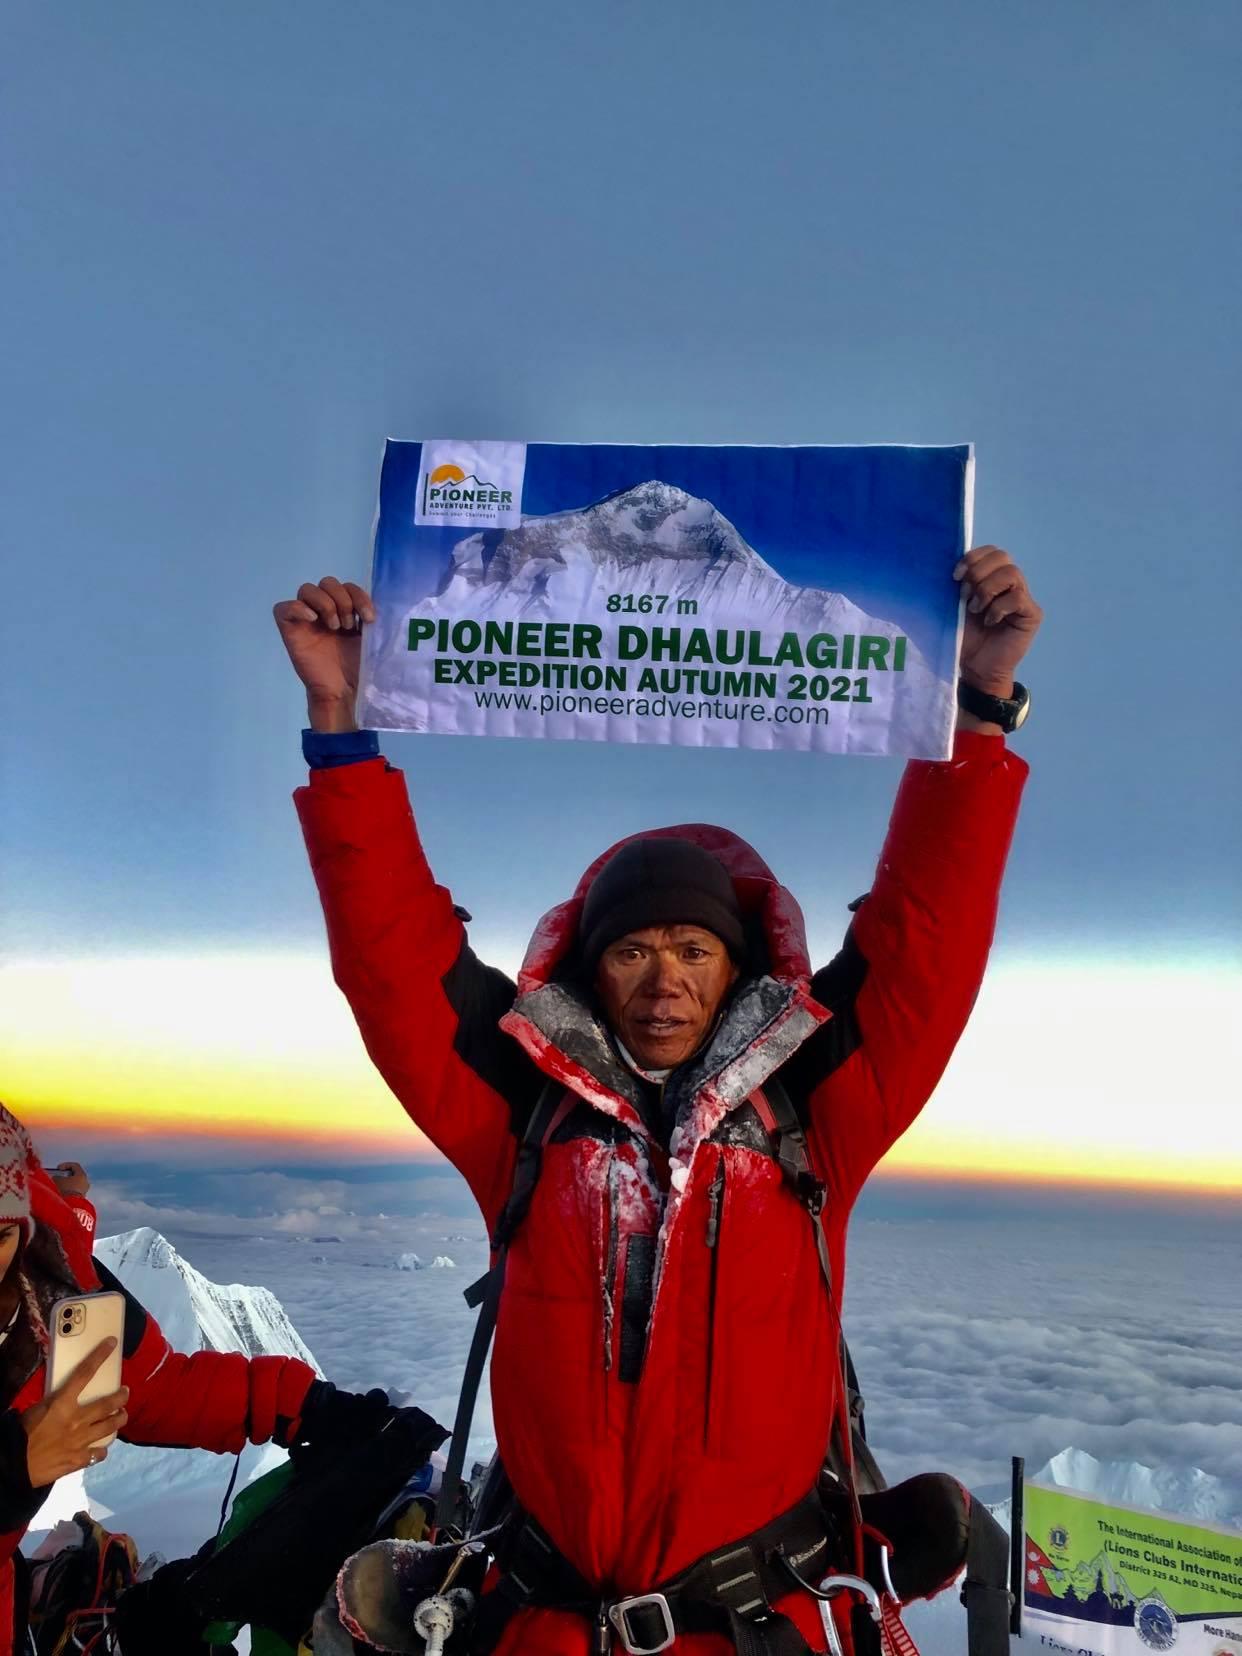 Mt. Dhaulagiri Expedition with Pioneer